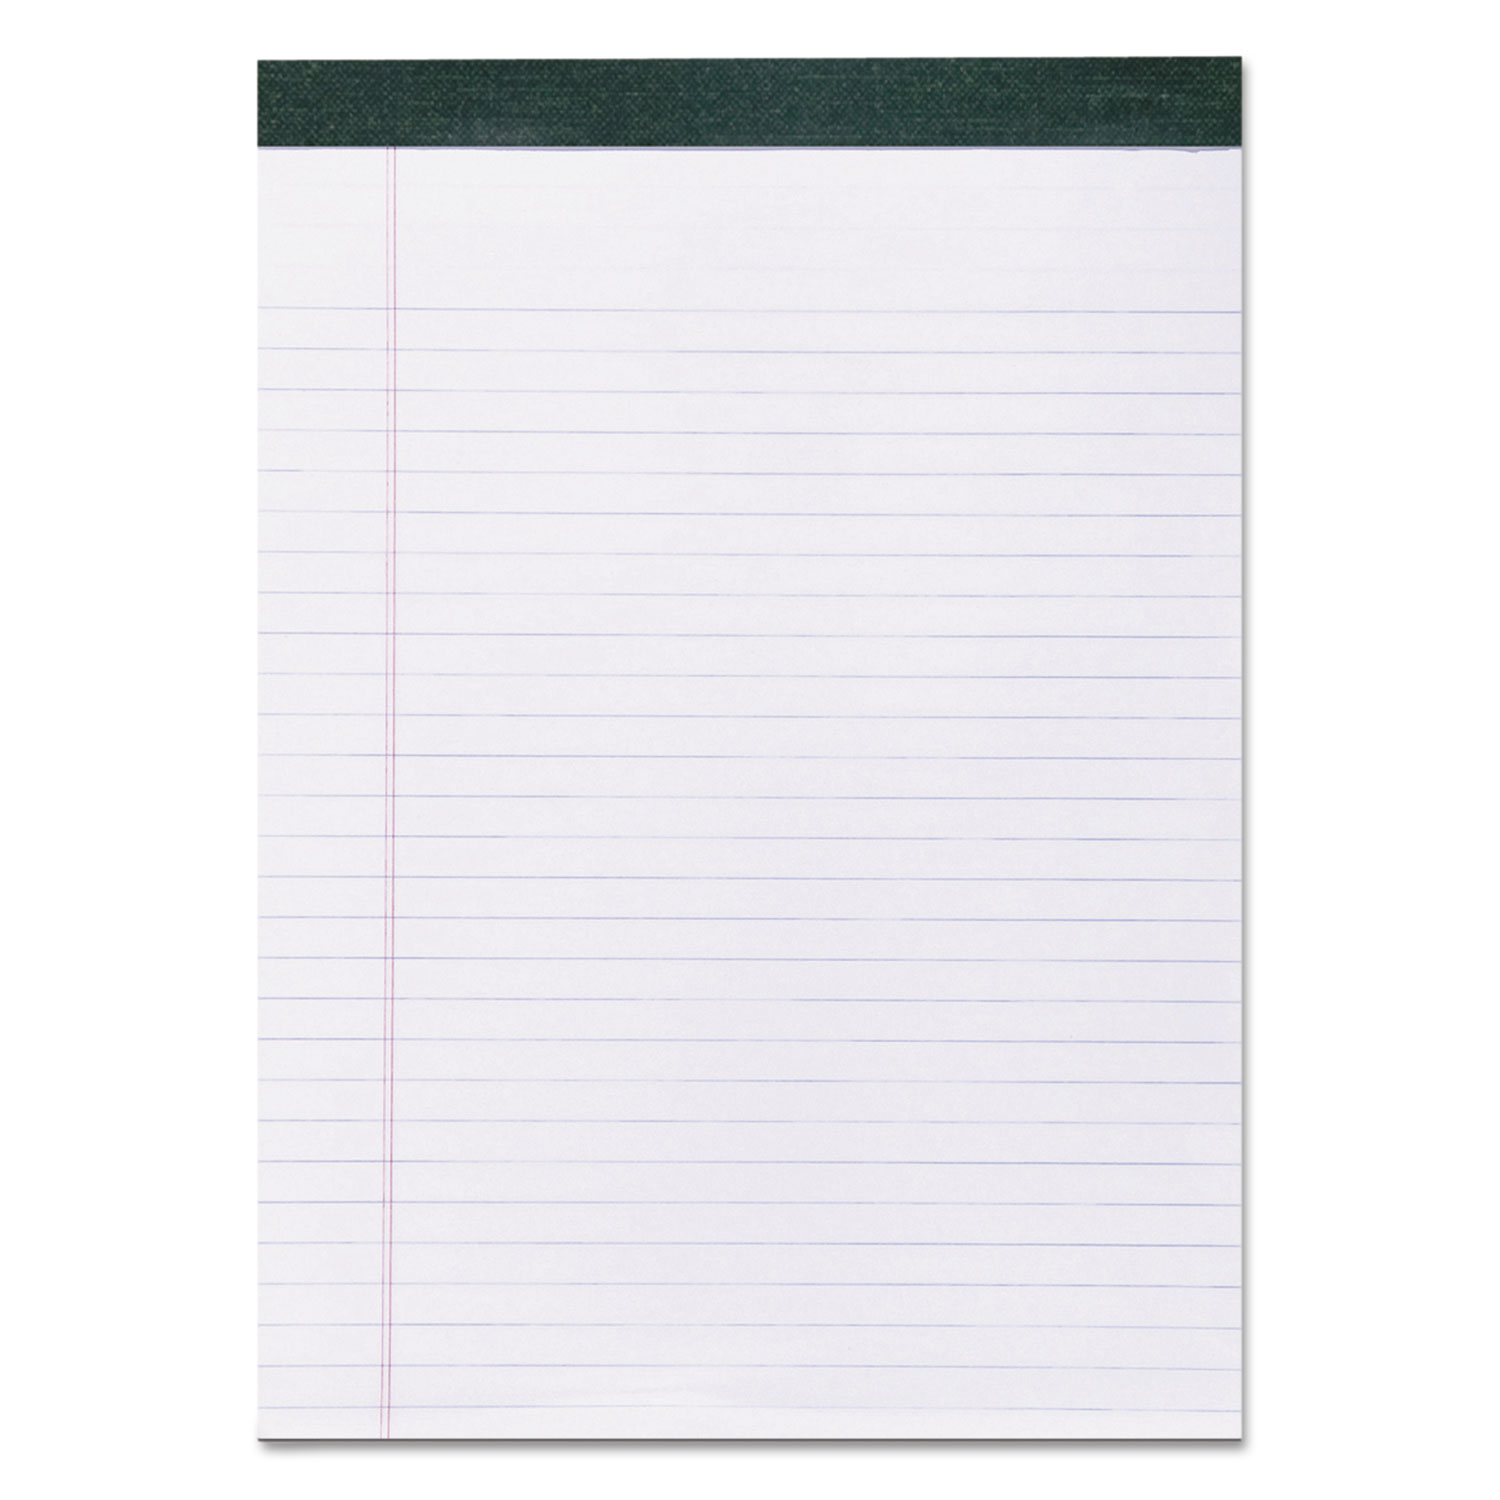  Roaring Spring 74713 Recycled Legal Pad, Wide/Legal Rule, 8.5 x 11, White, 40 Sheets, Dozen (ROA74713) 